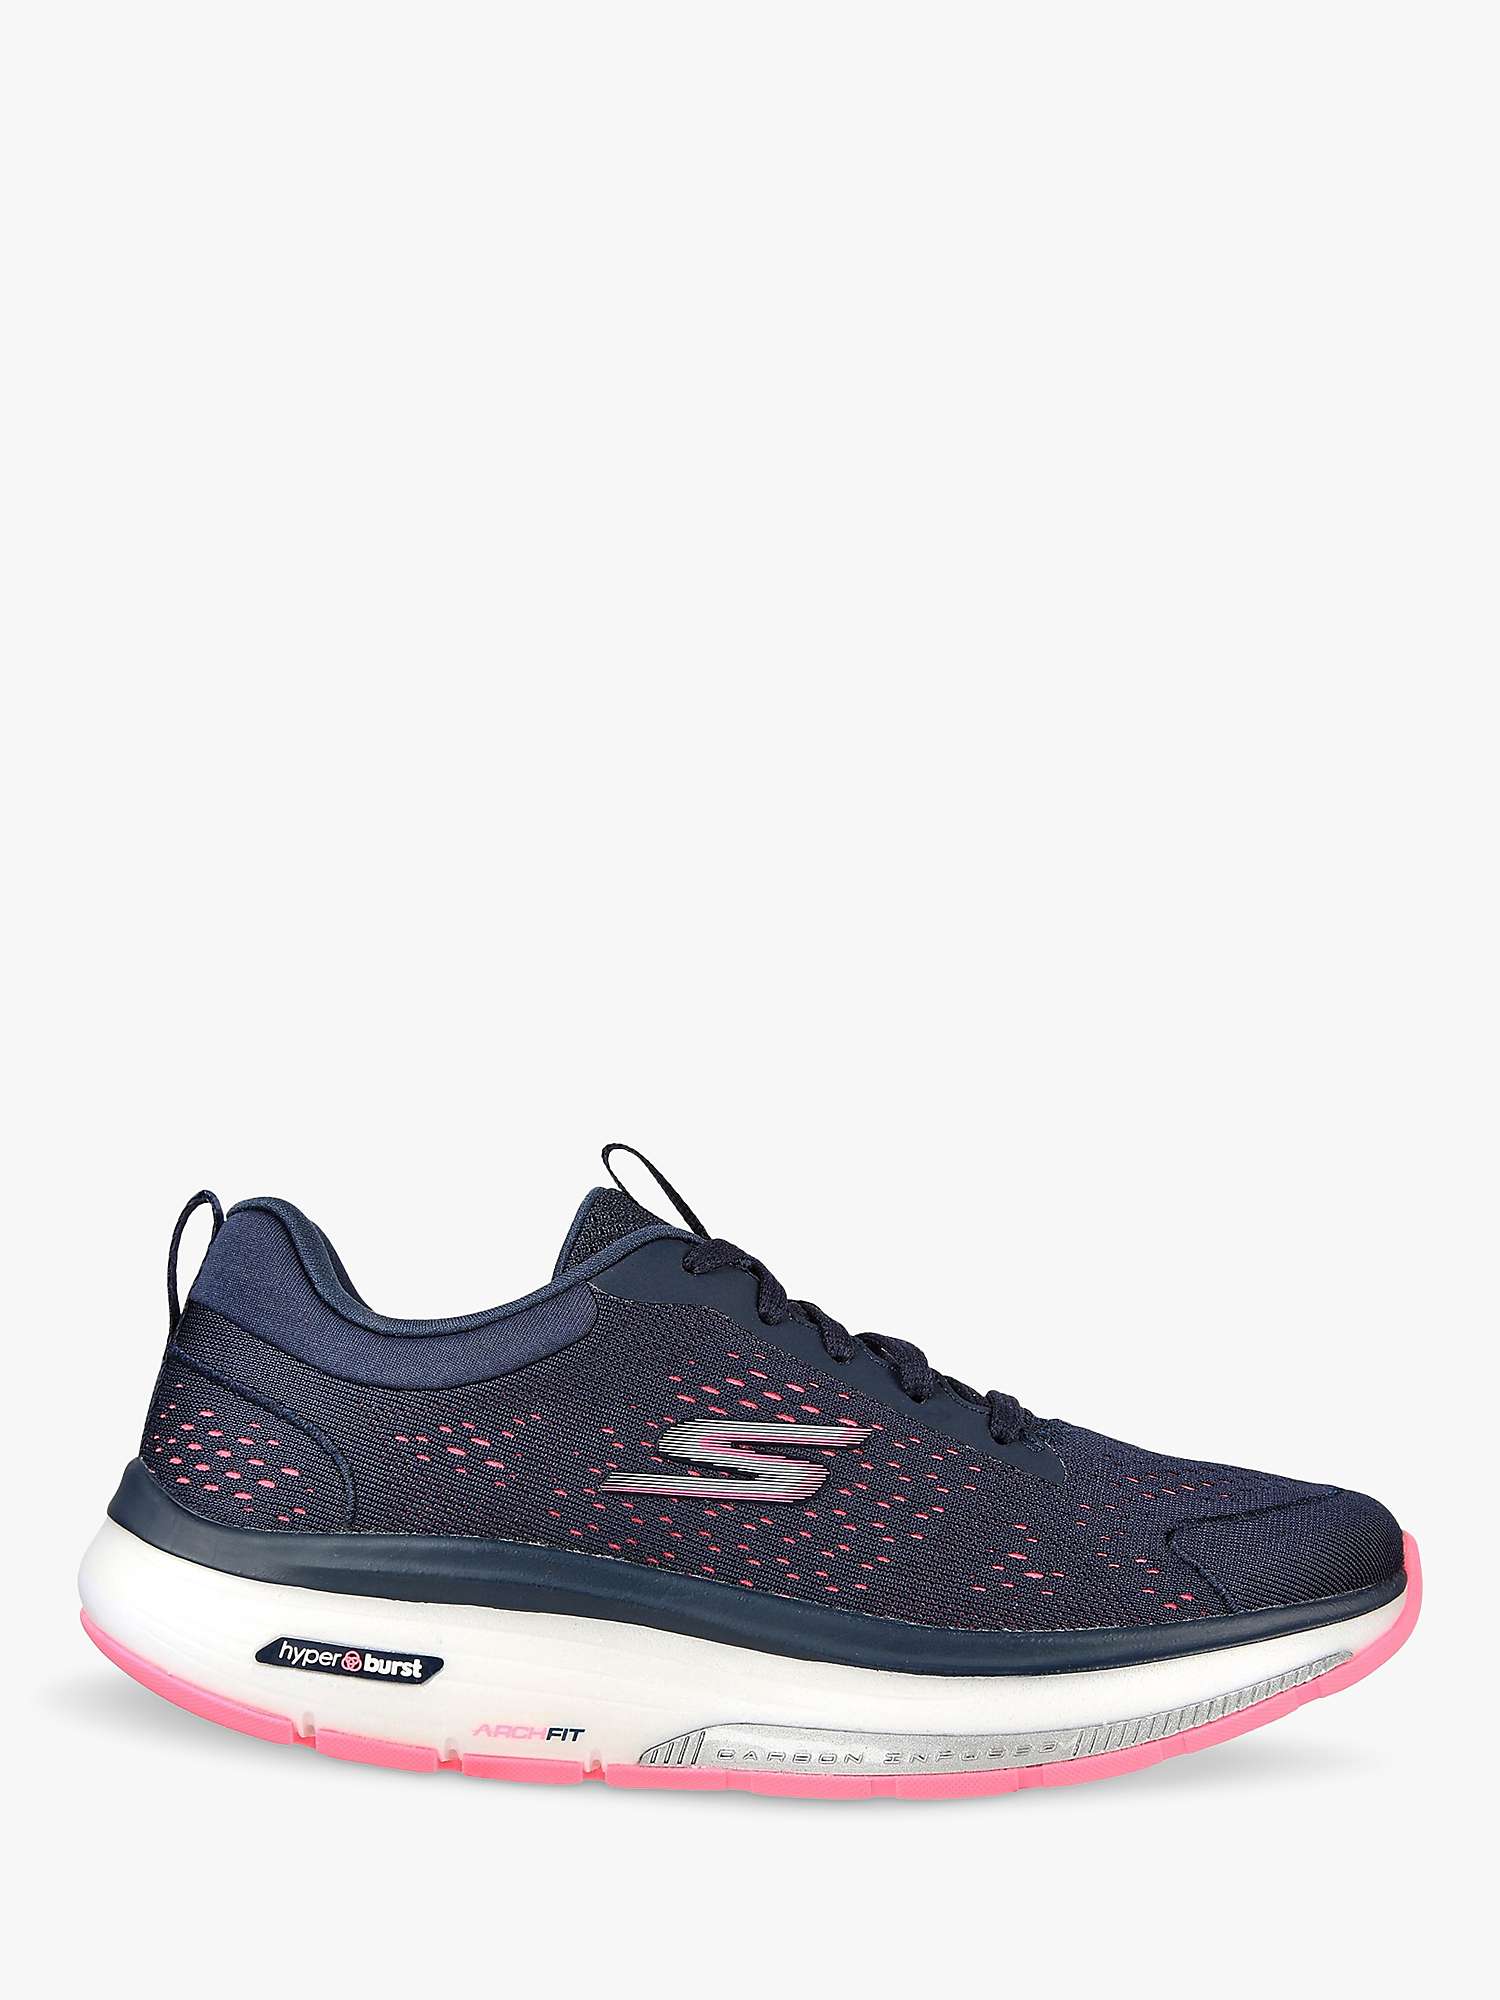 Buy Skechers Workout Walker Outpace Trainers, Navy/Multi Online at johnlewis.com